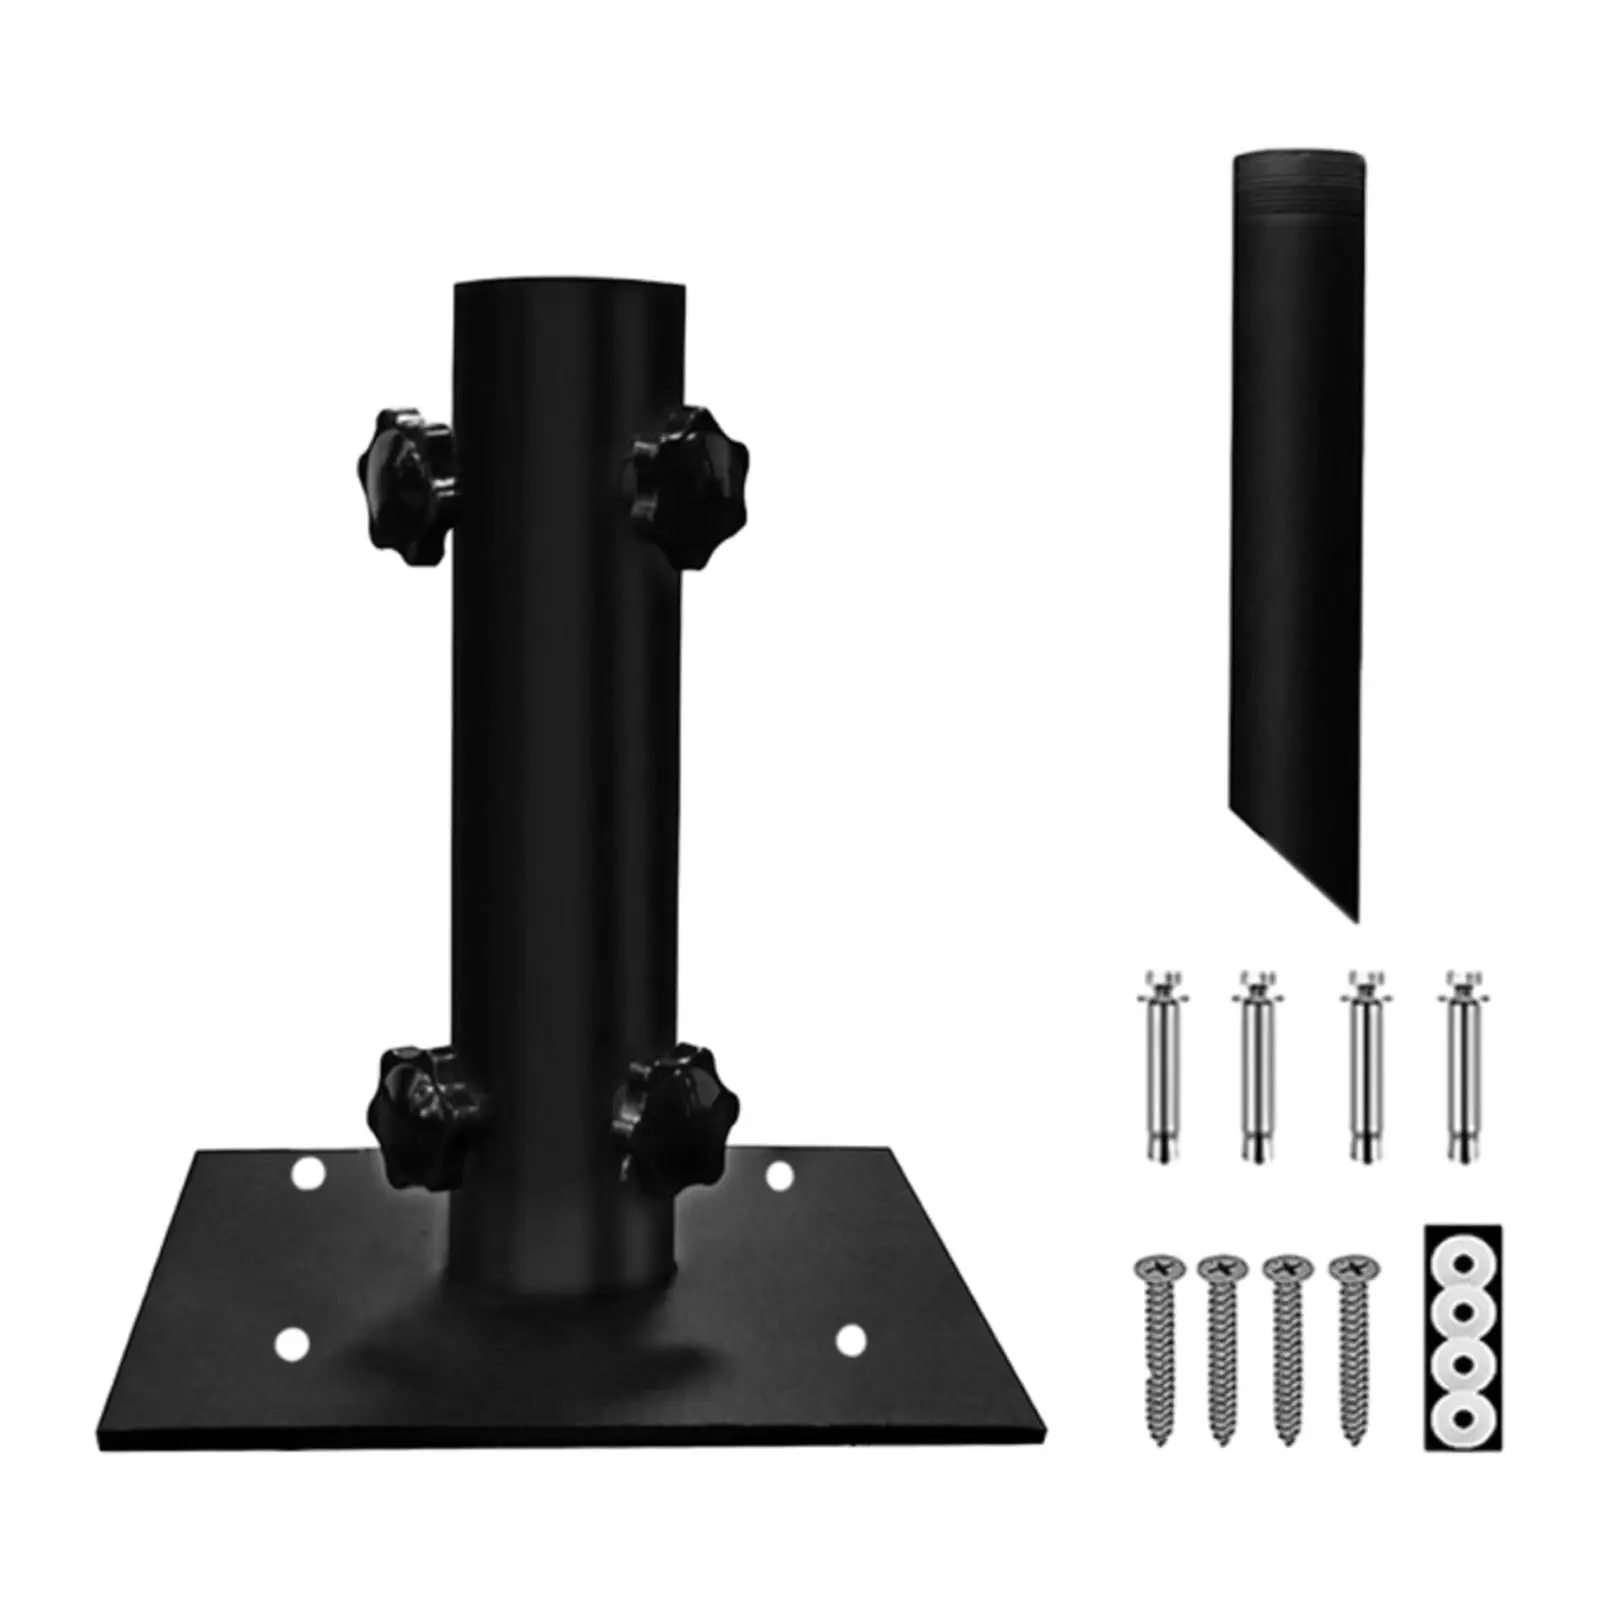 Patio Umbrella Outdoor Base with Four Knob Umbrella Pole Mount Stand for Deck Mount Docks Courtyard Picnic Tables Balcony